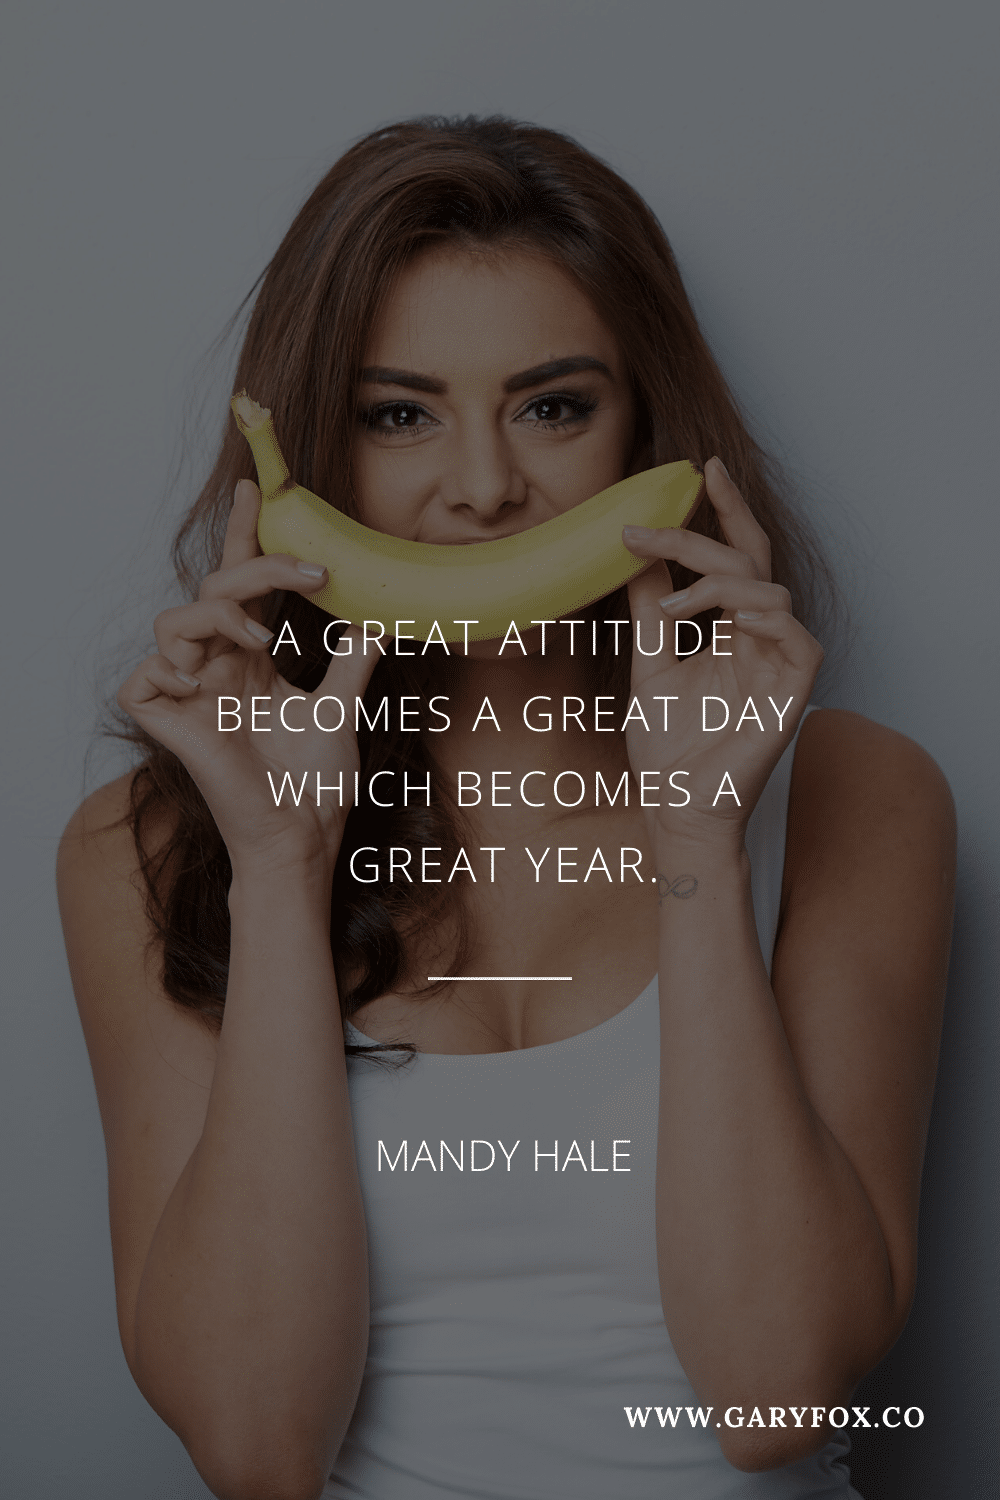 A Great Attitude Becomes A Great Day Which Becomes A Great Year - Mandy Hale